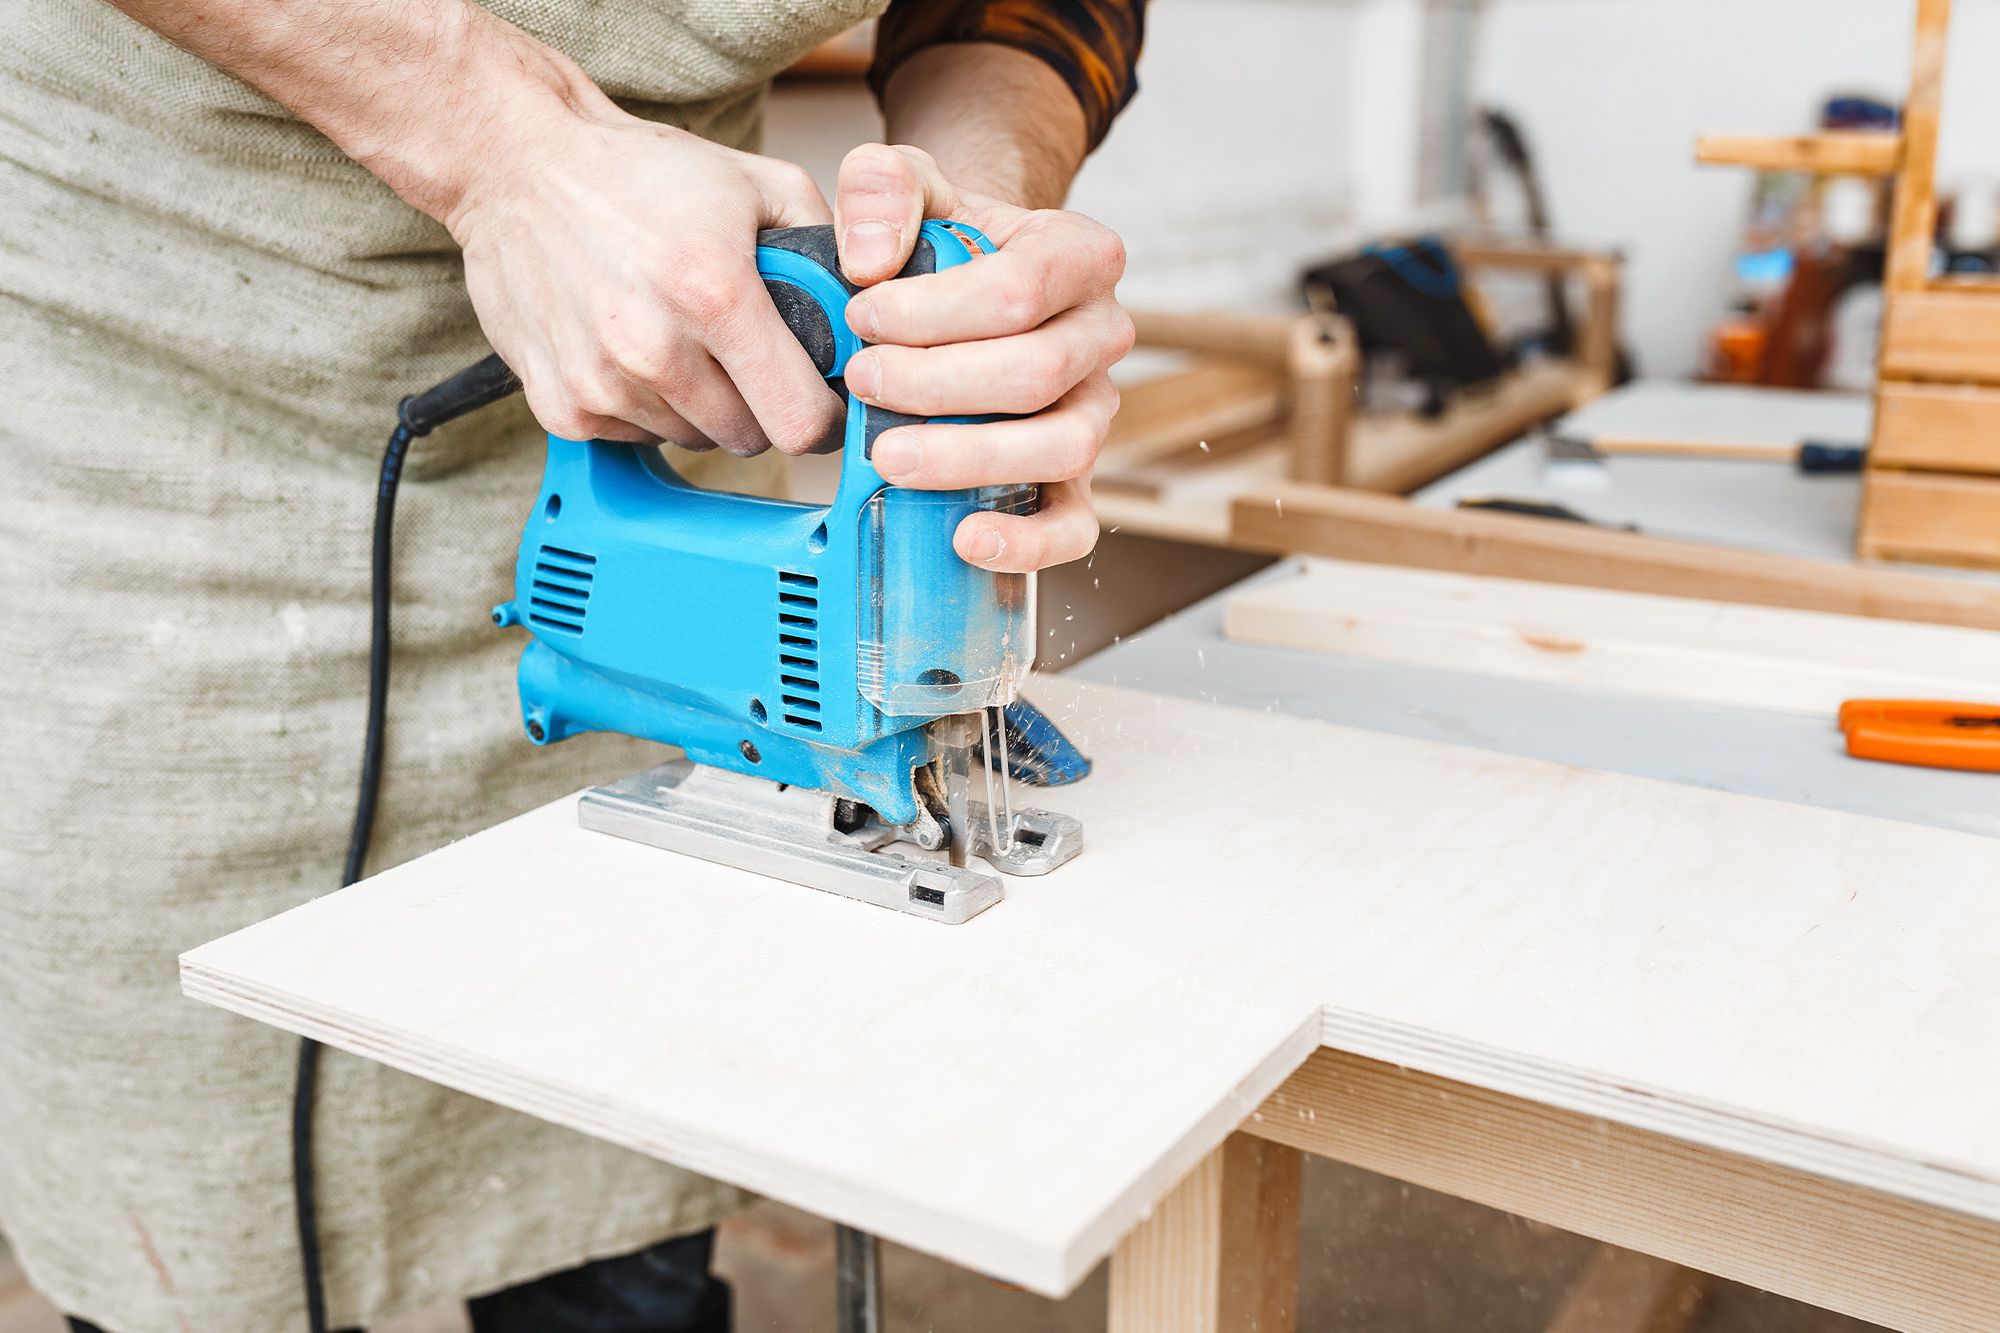 The Ultimate Guide to Jig Saws Choosing the Right Tool for Your Woodworking Needs